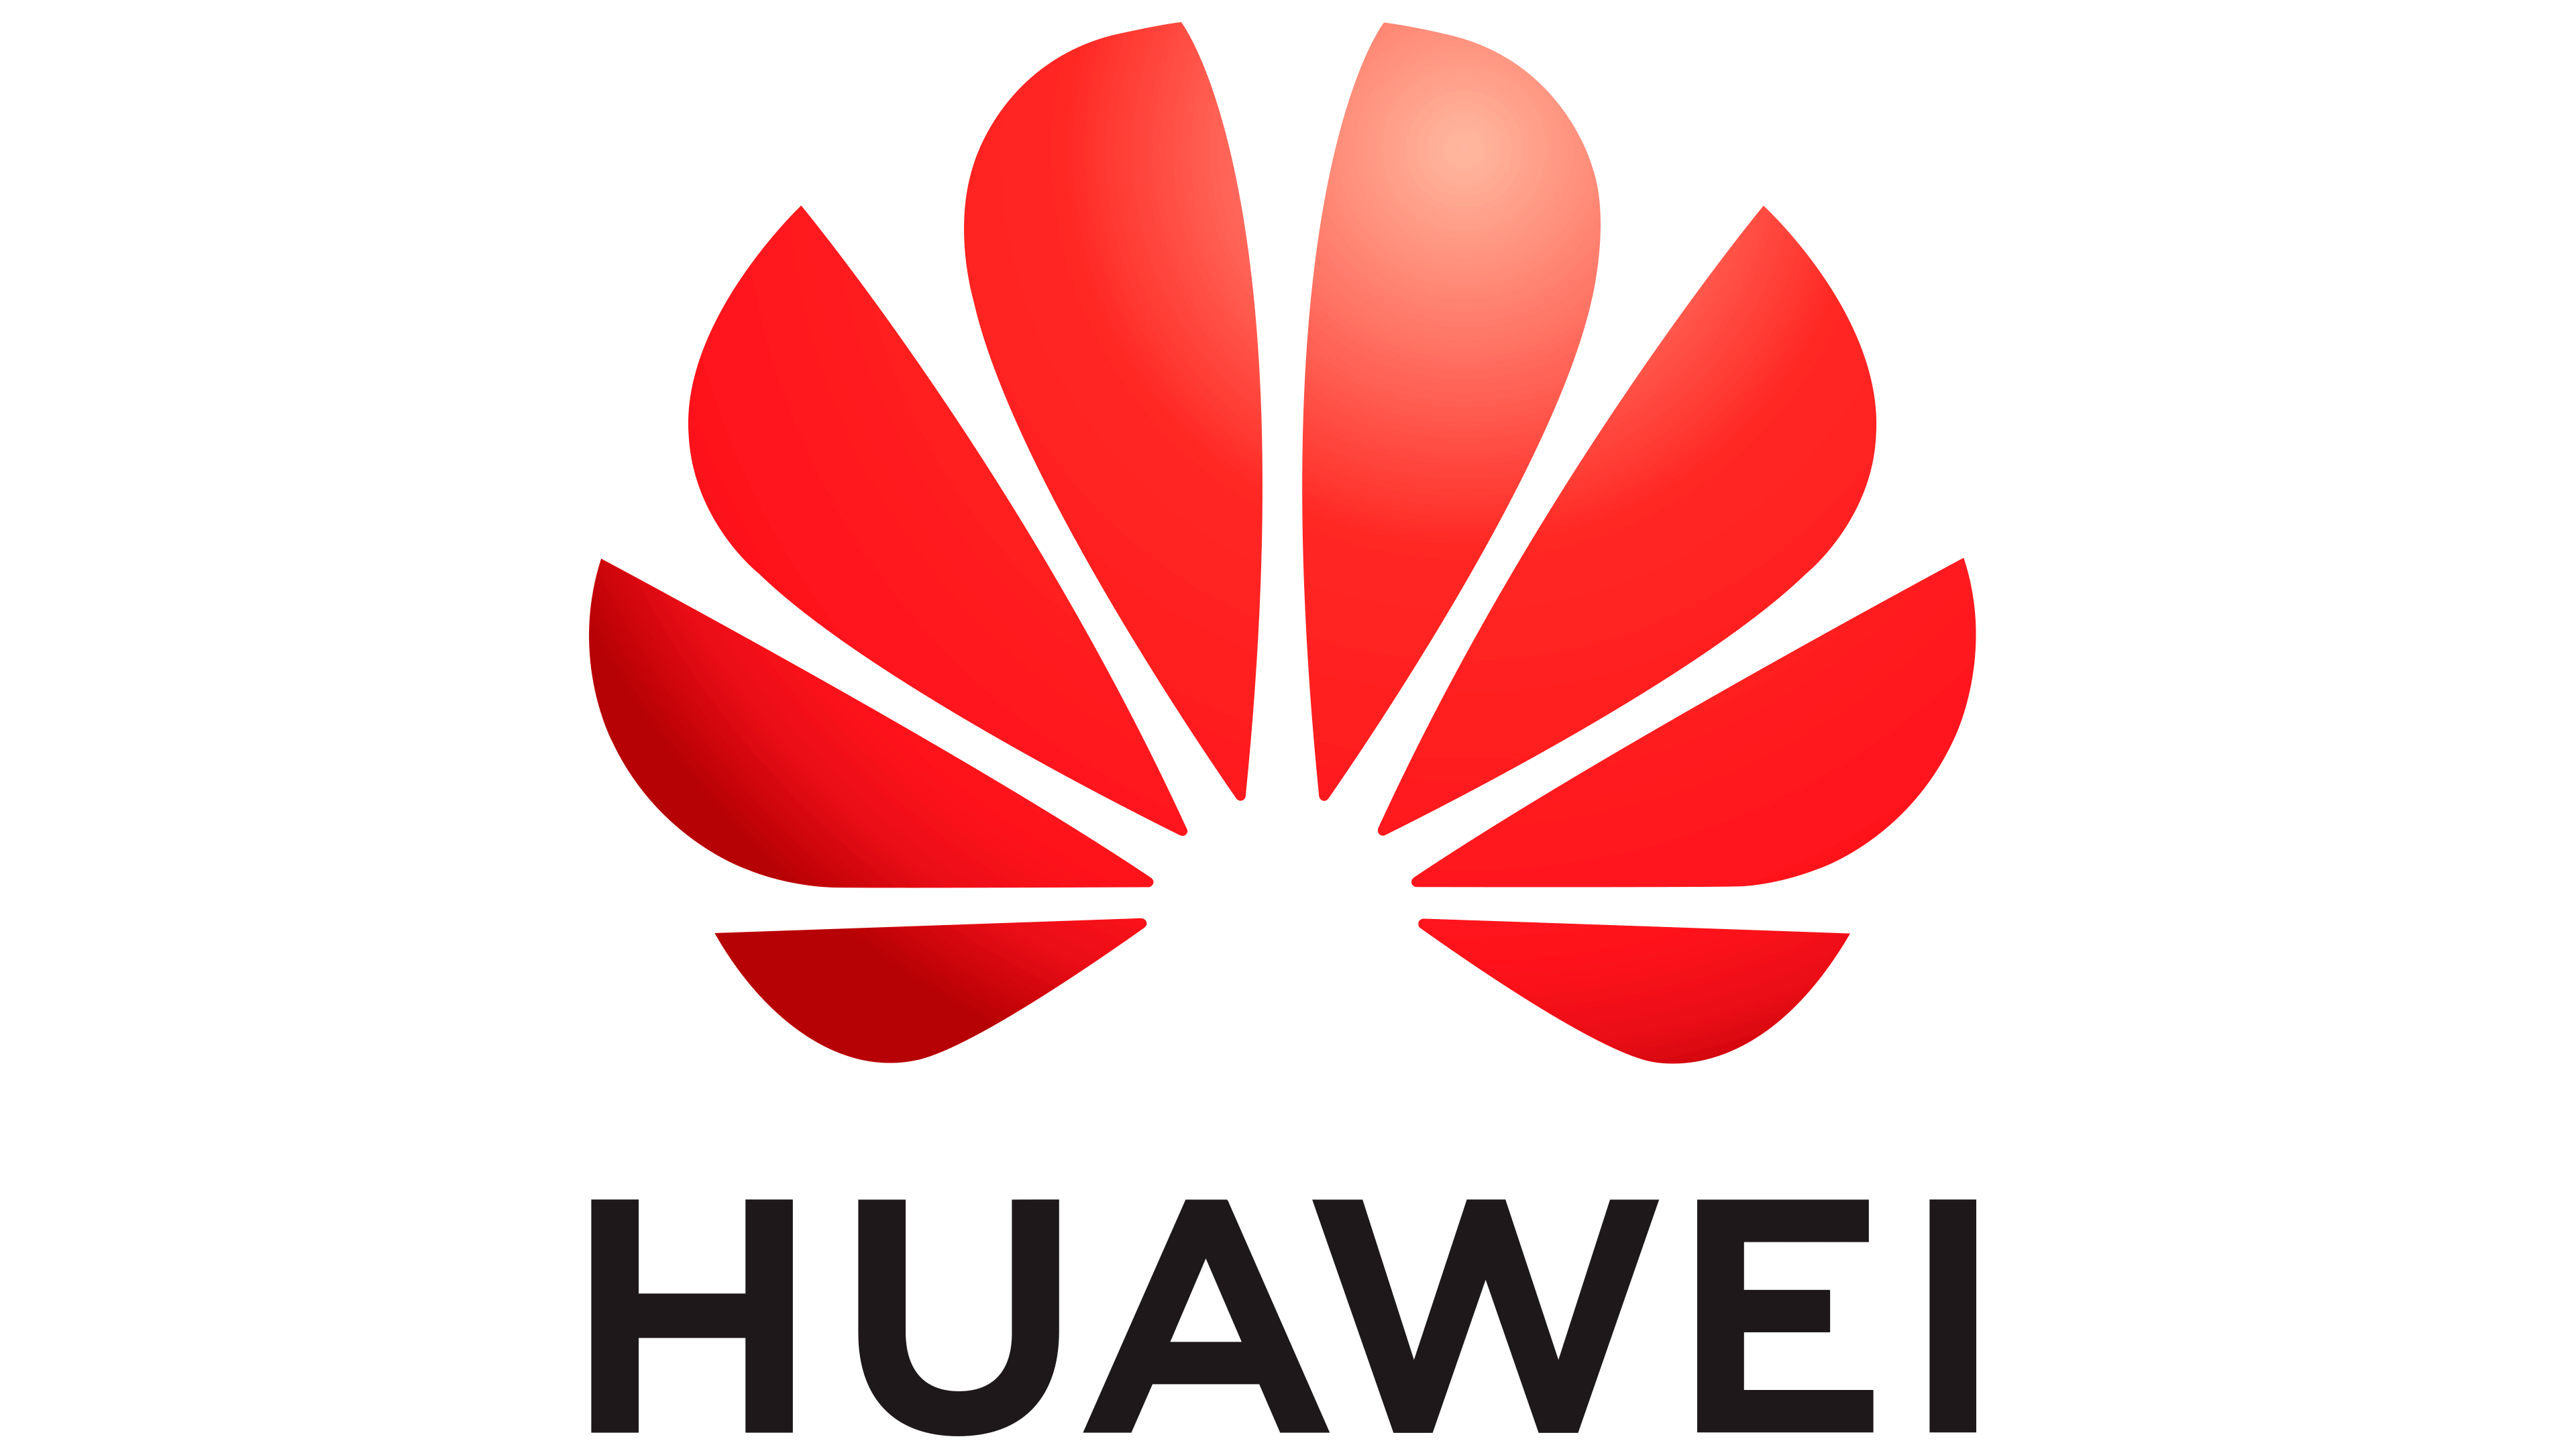 Huawei’s Vision: Revolutionizing Technology for a Connected World